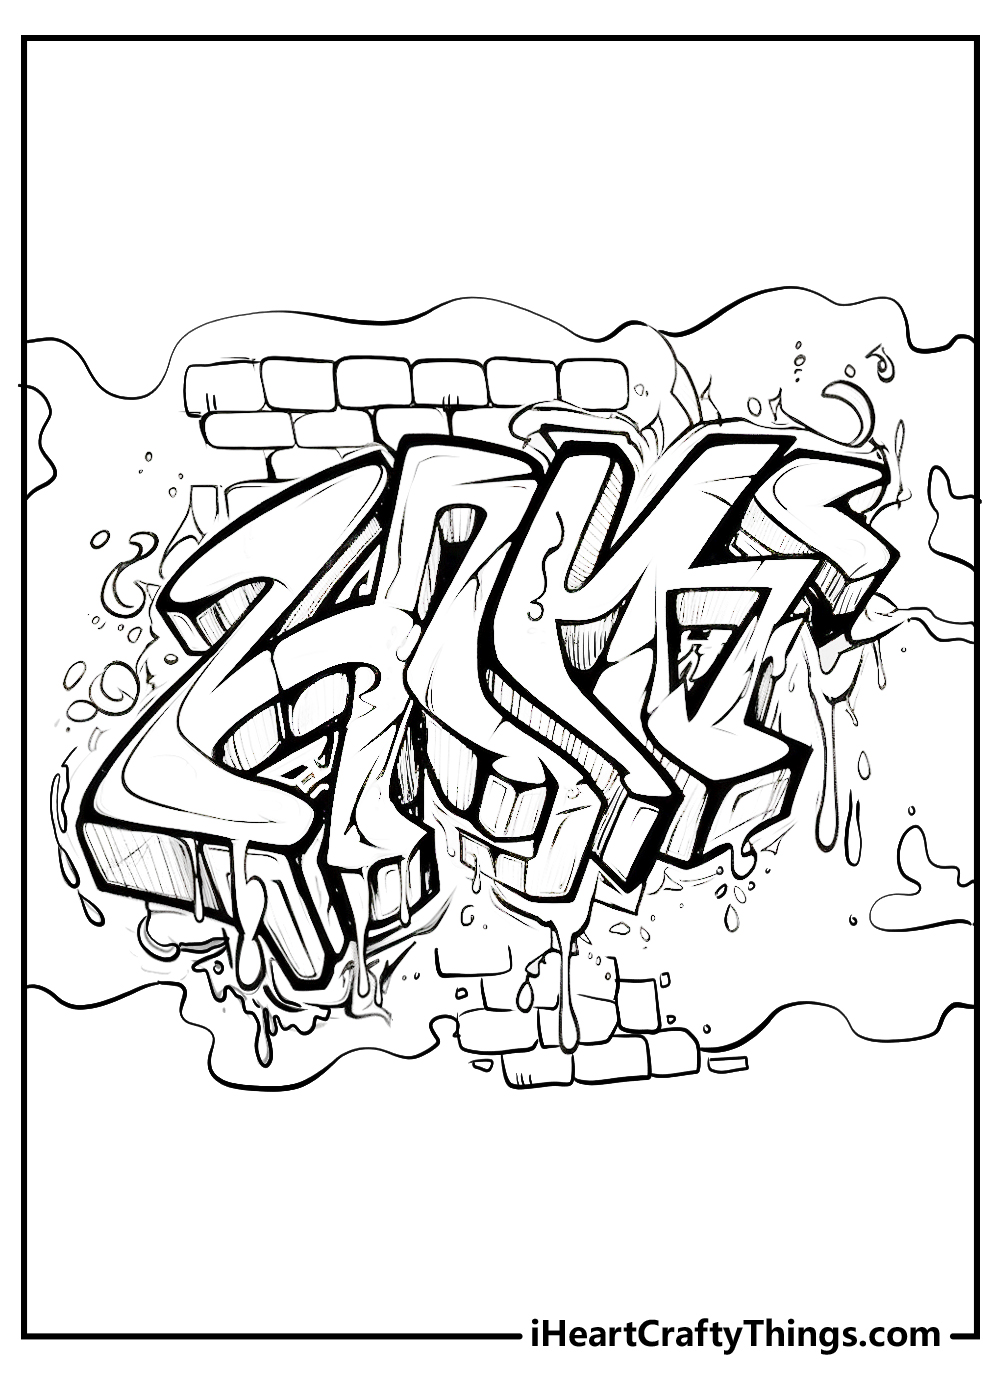 New Graffiti Coloring Pages